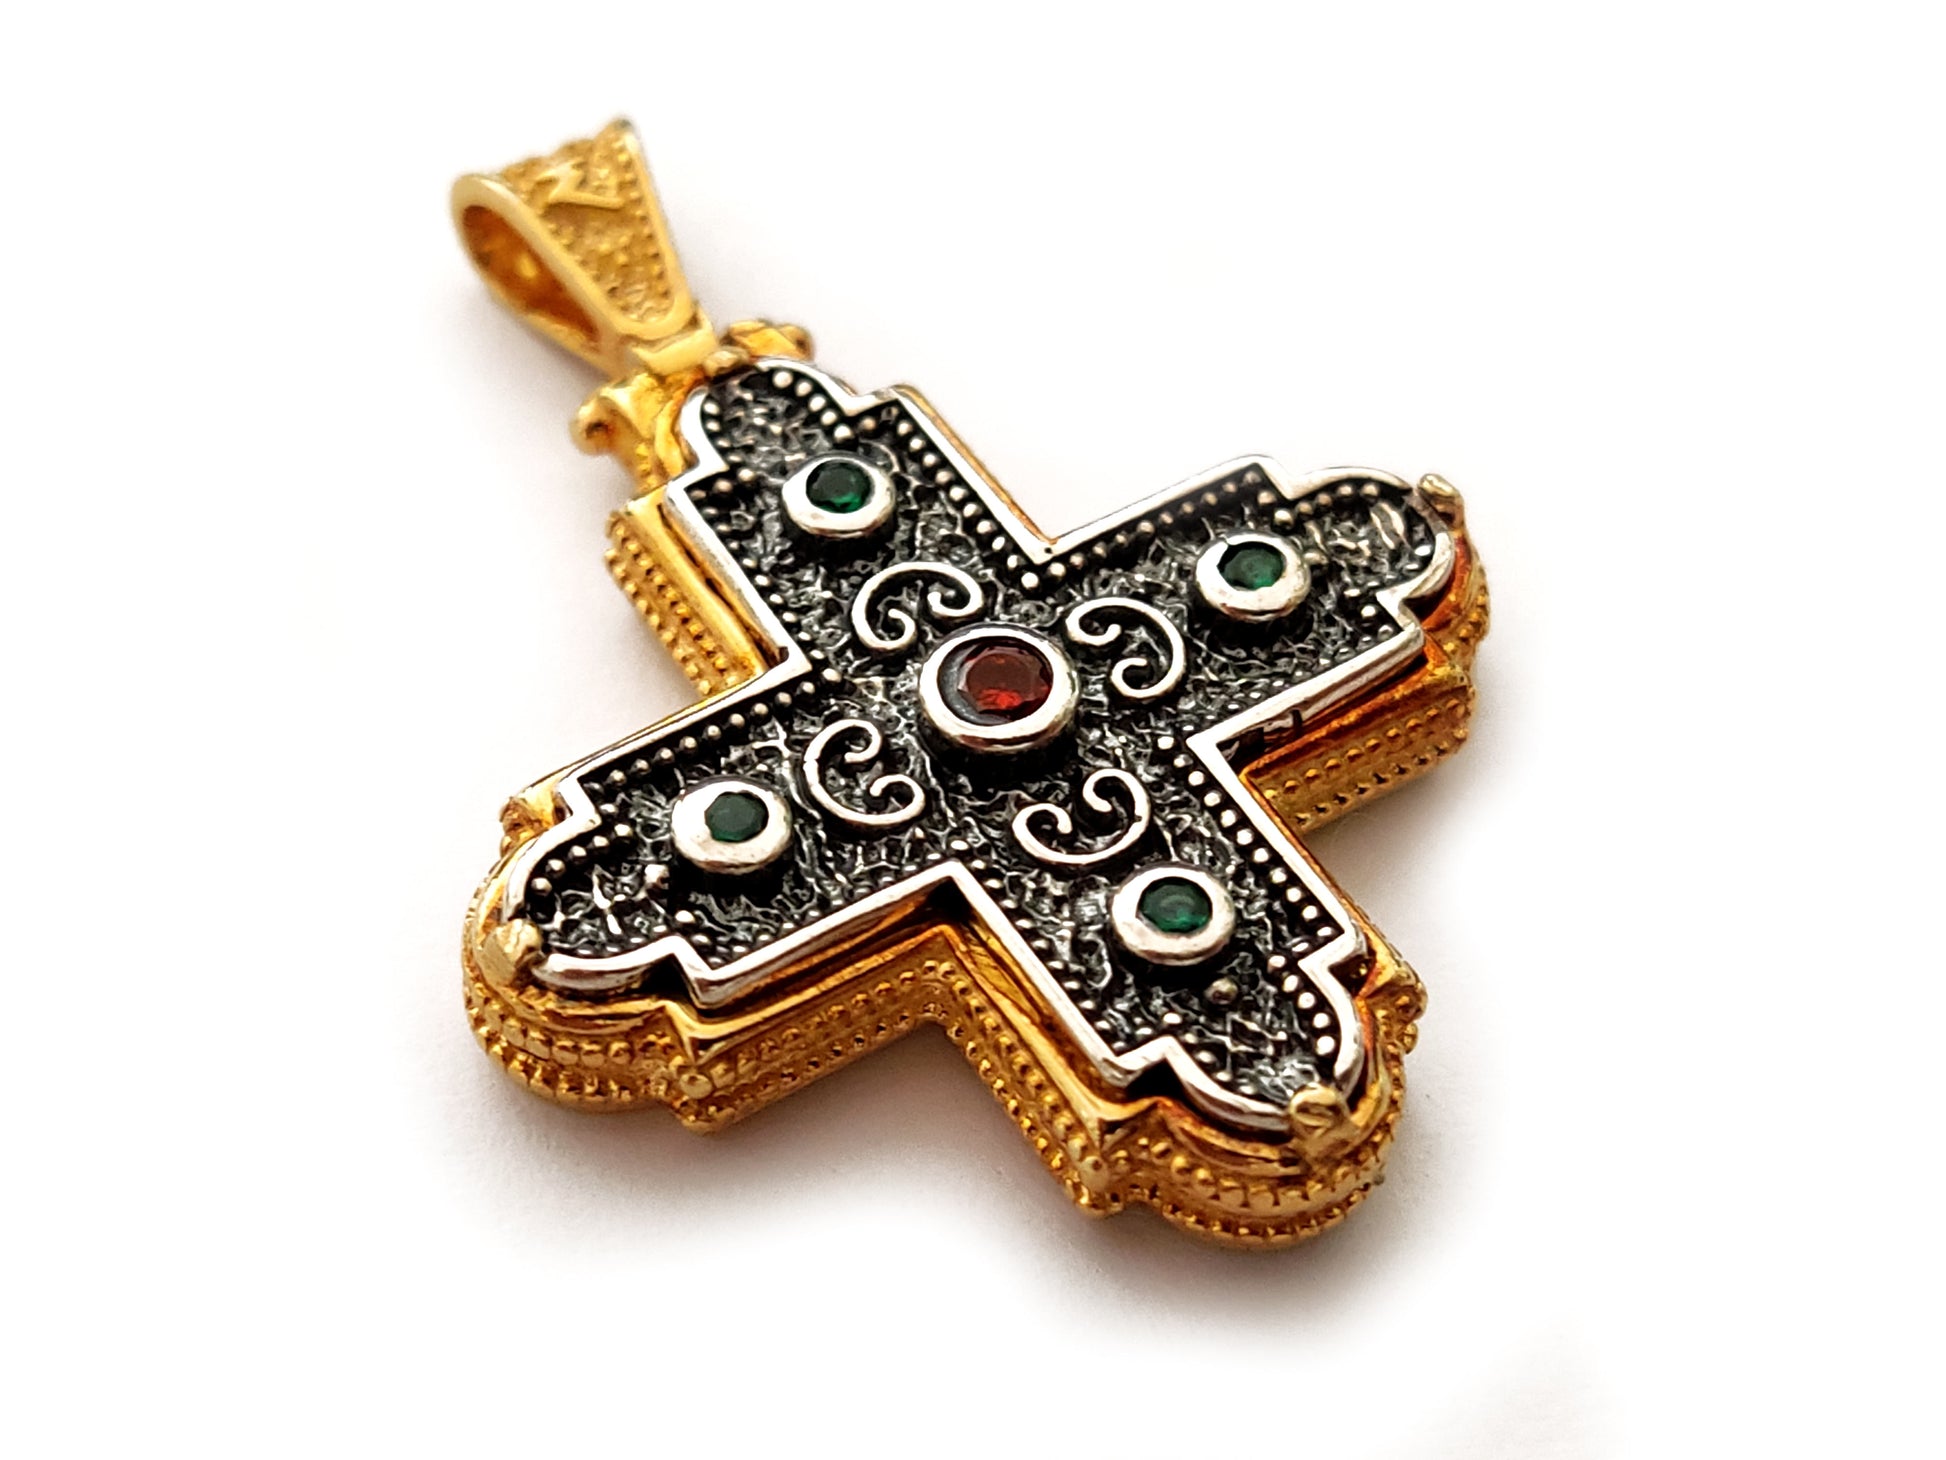 Handmade Greek byzantine cross with gold plated finish and red-green crystal stones. The cross measures 30x30mm and is made in Greece.